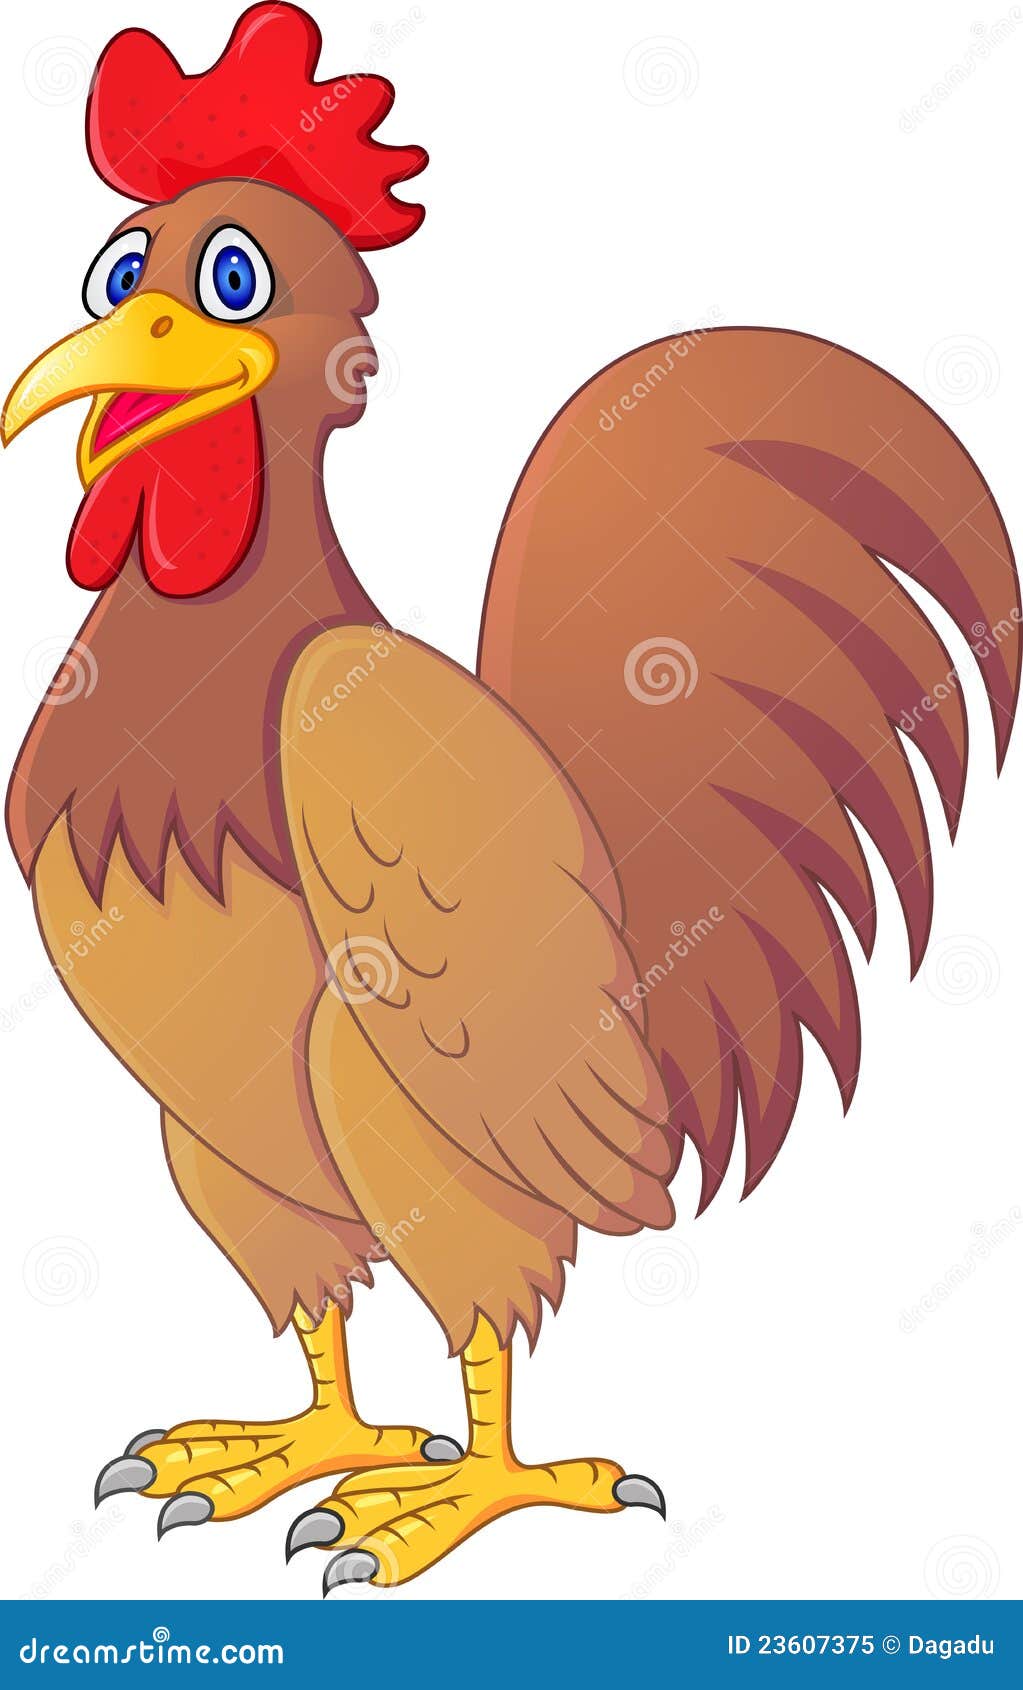 Rooster Cartoon Royalty Free Stock Photo - Image: 23607375